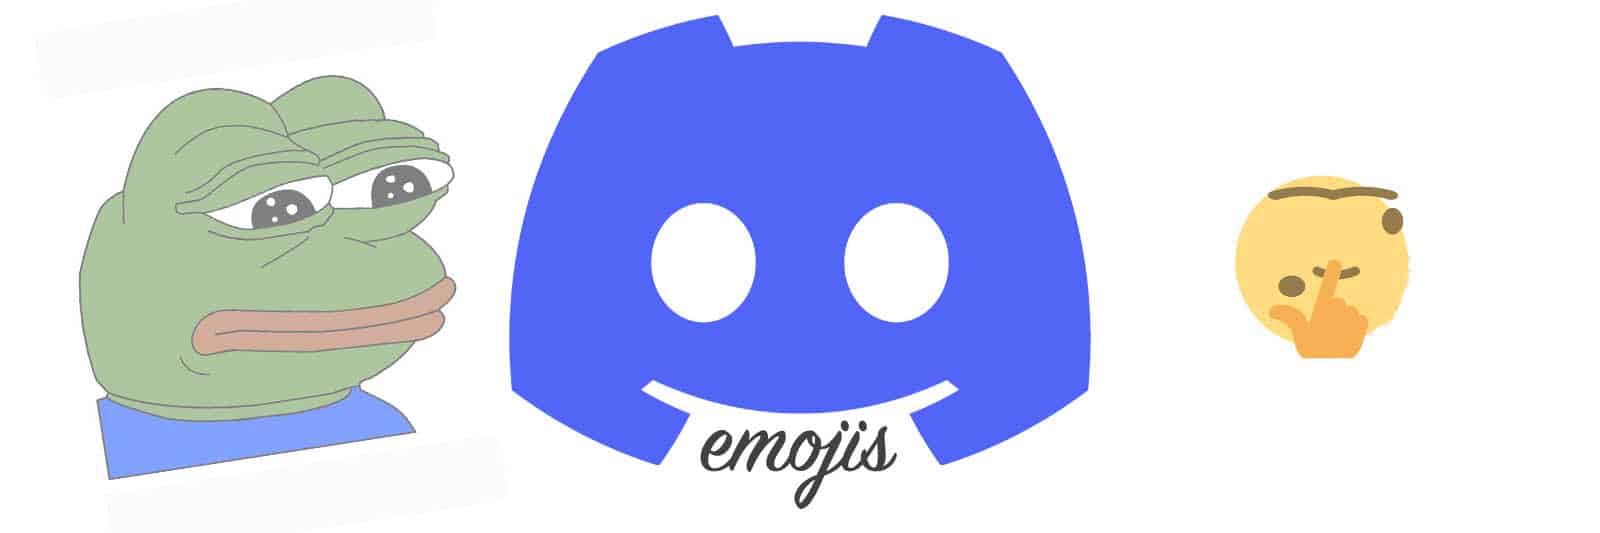 How To Find Discord Emojis